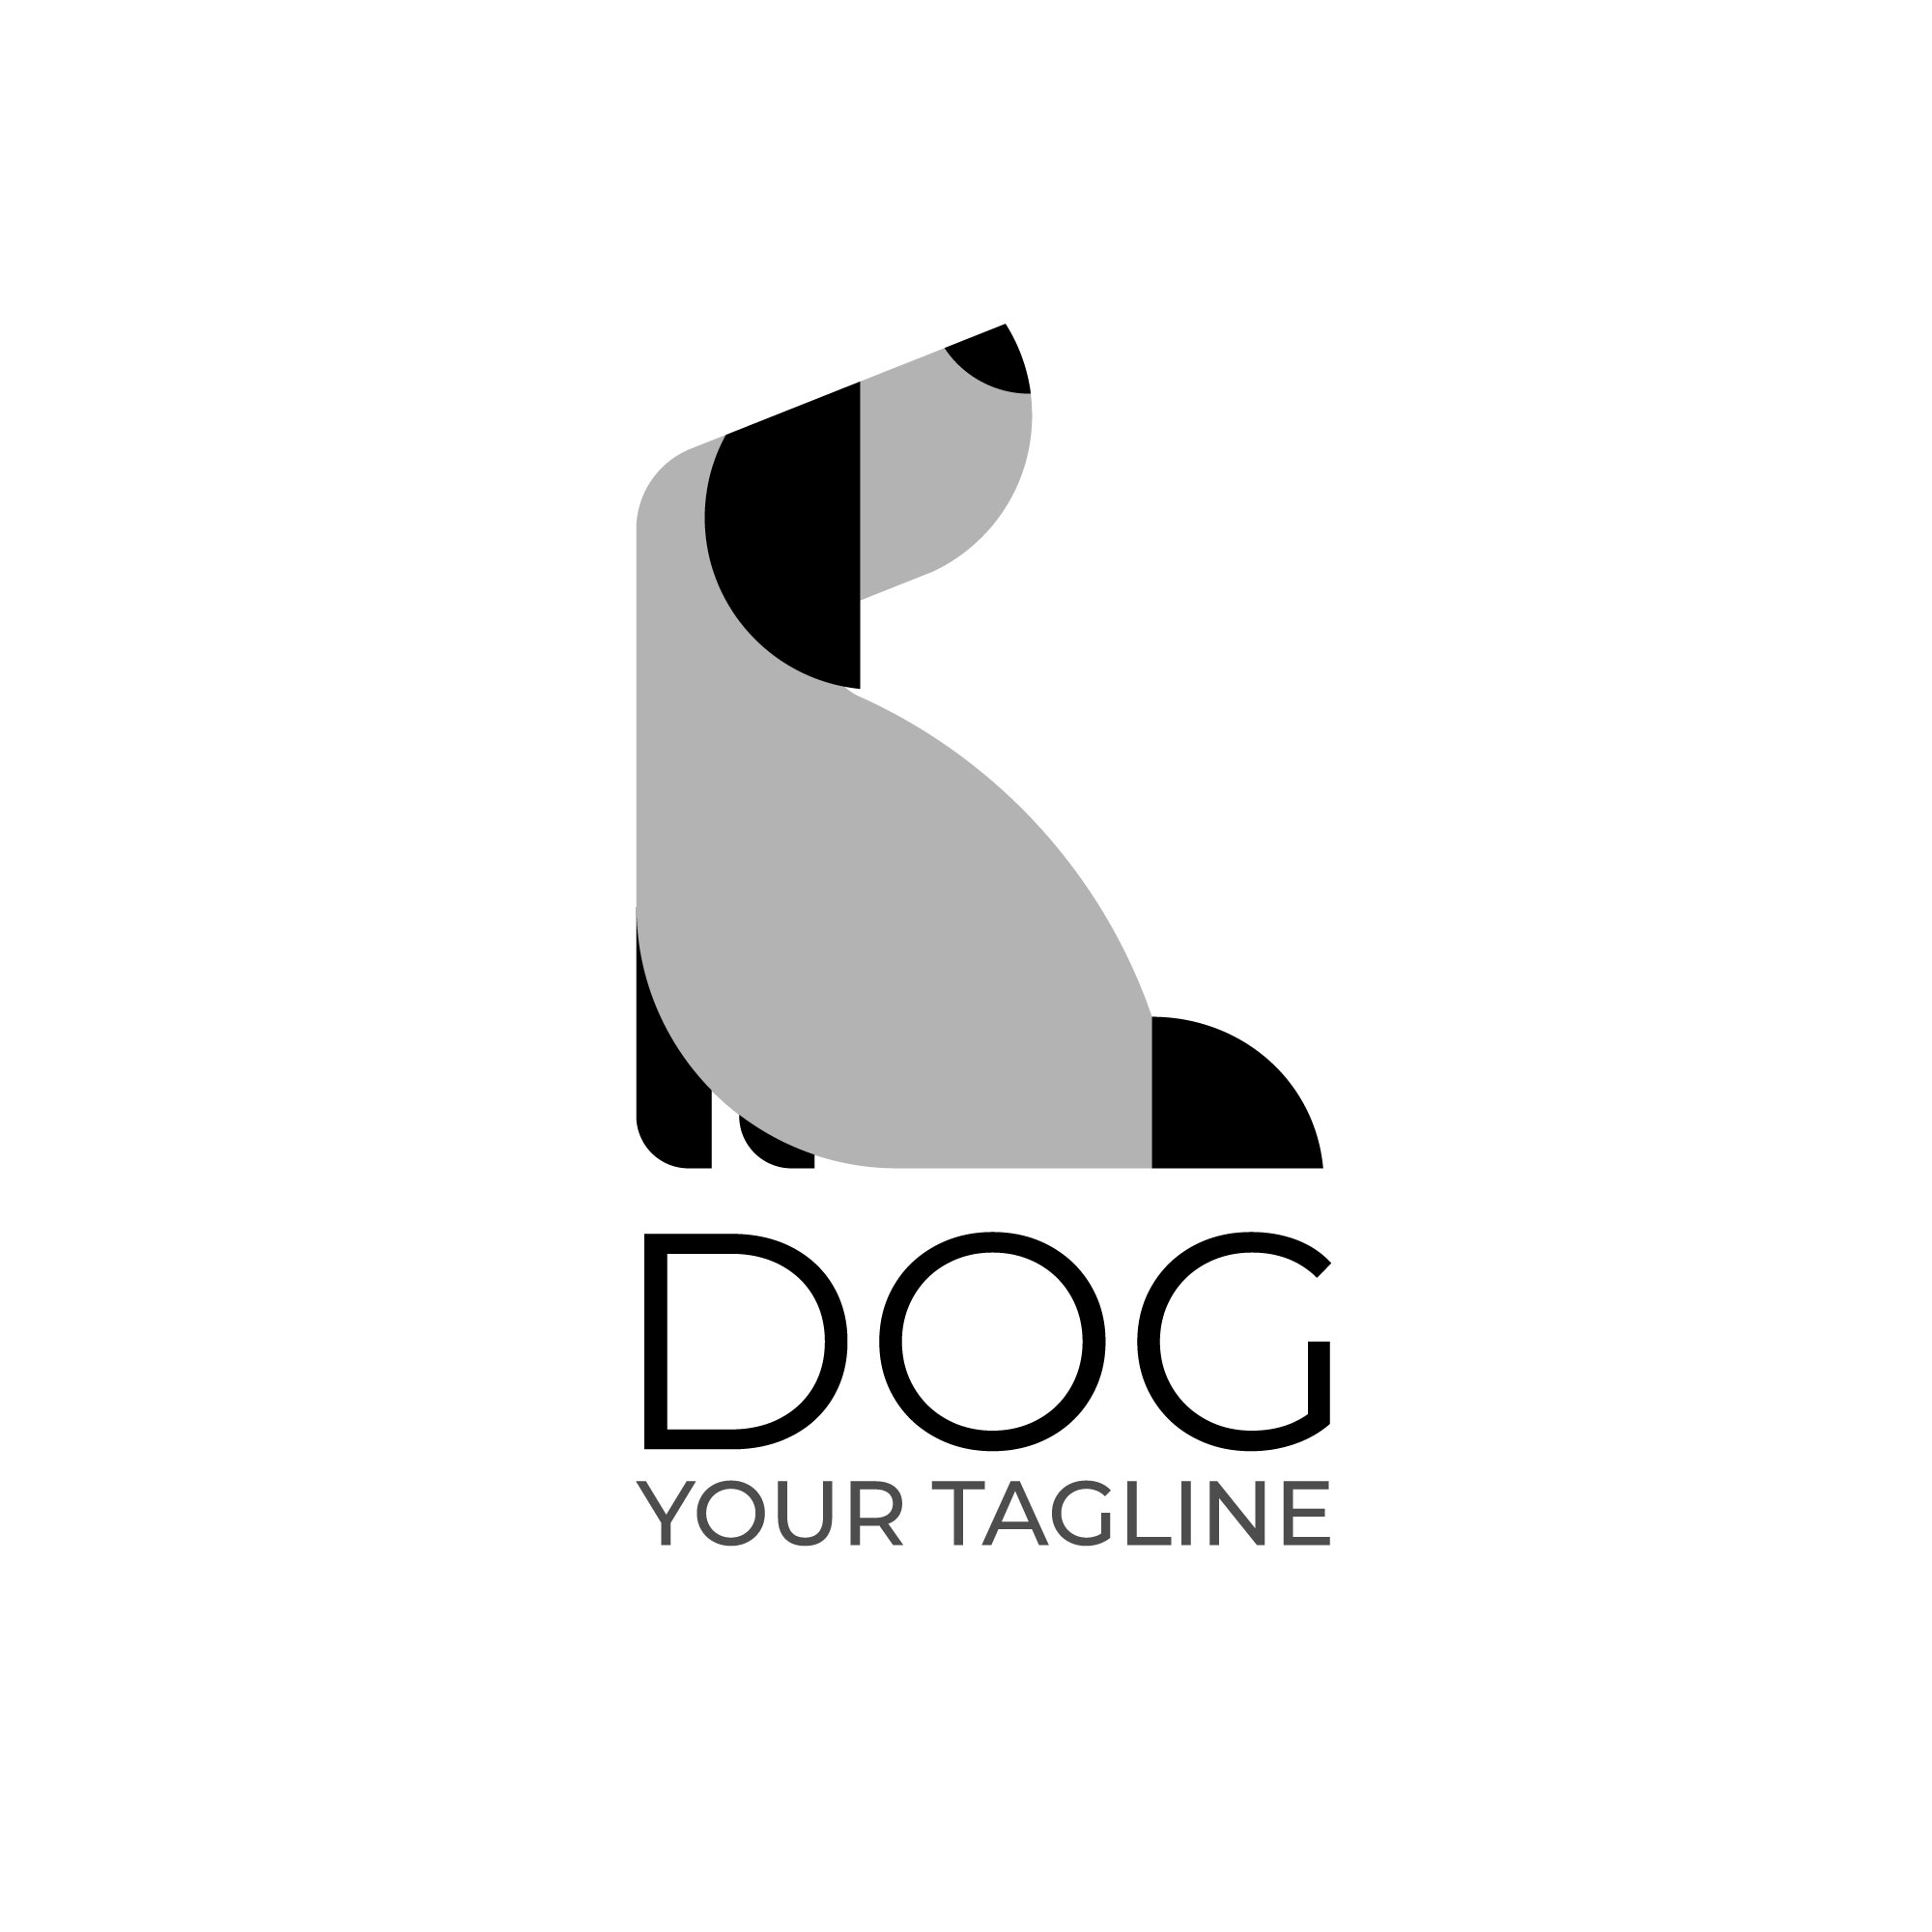 Beautiful Dog logo with black and grey color